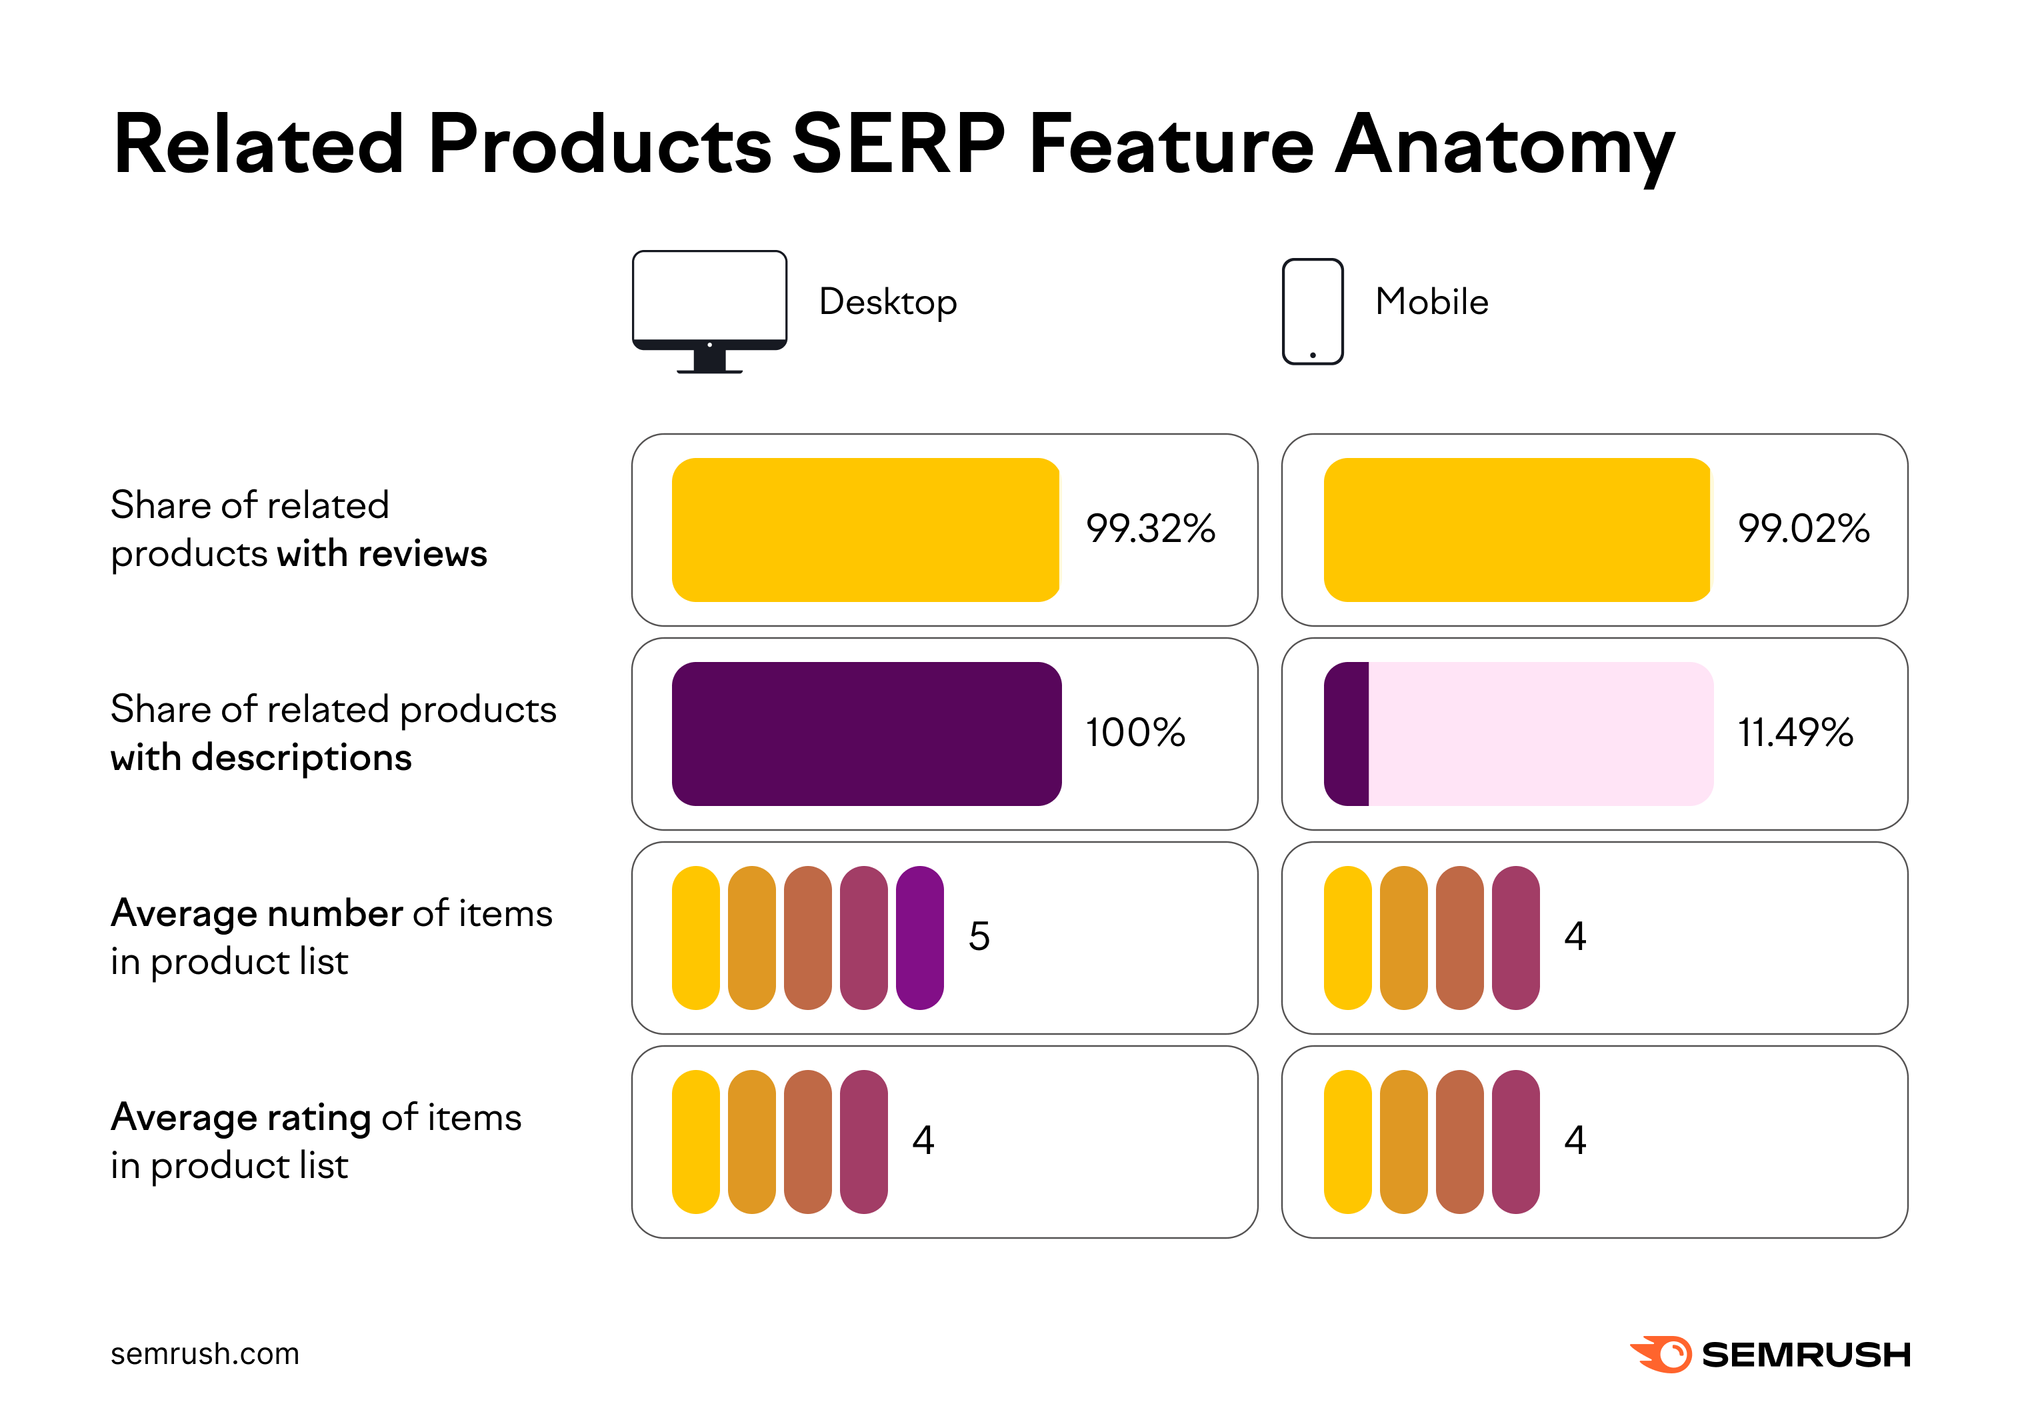 A chart displaying the Related Products SERP Feature Anatomy for desktop and mobile.